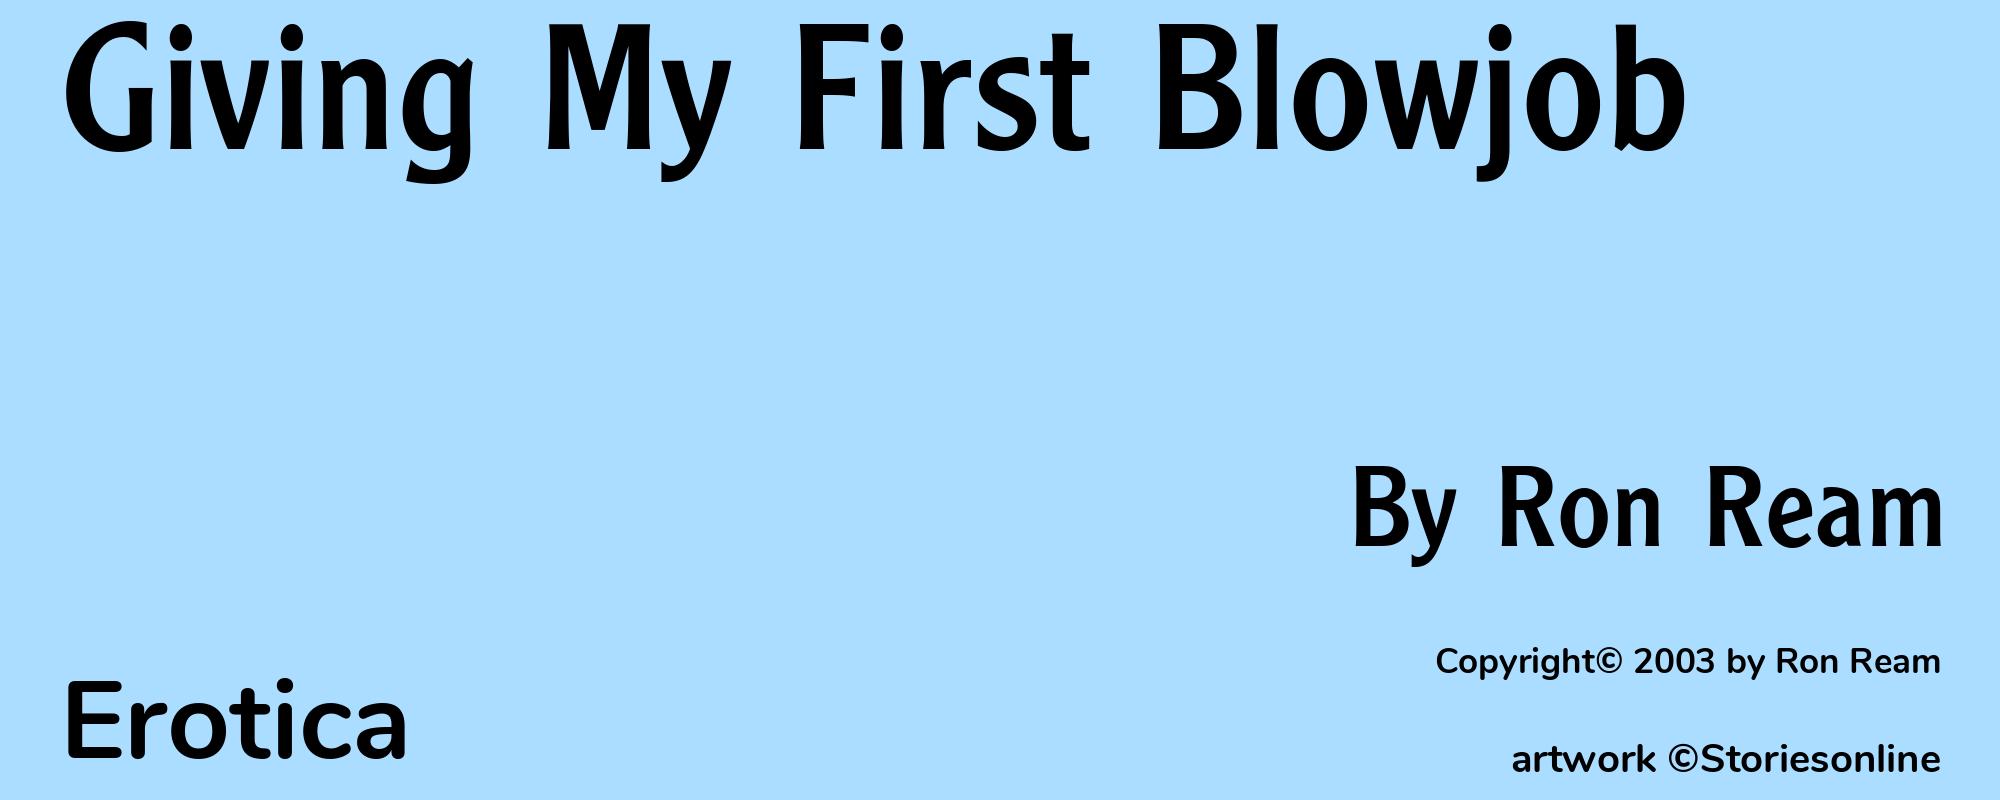 Giving My First Blowjob - Cover